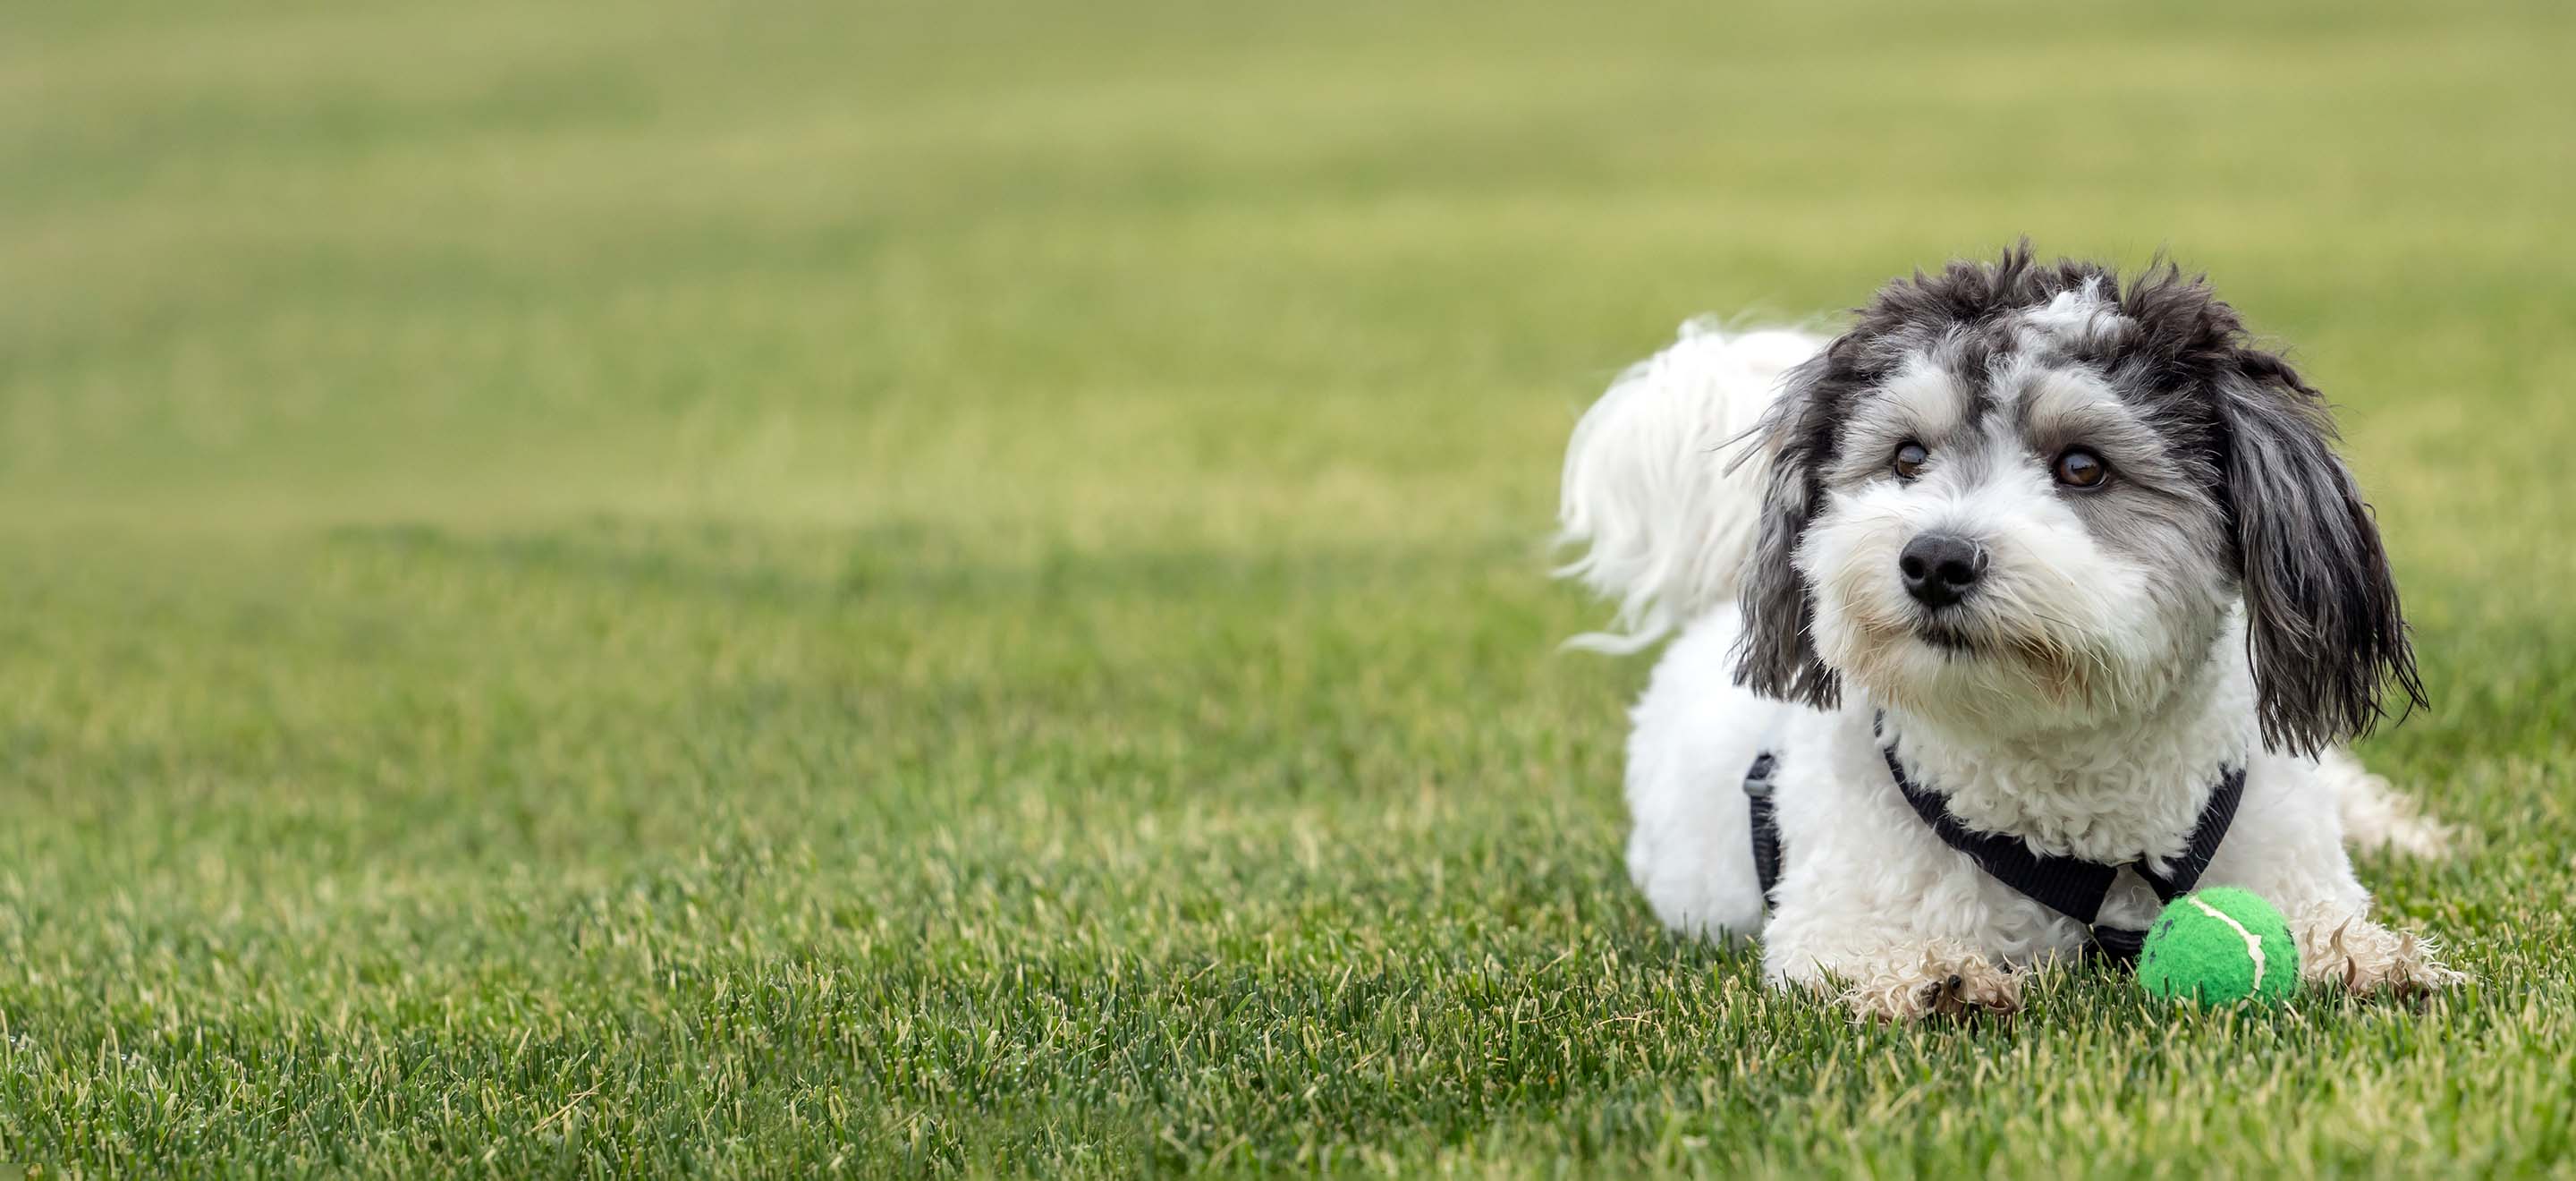 A Havanese dog laying in a grassy field with it's green tennis ball image